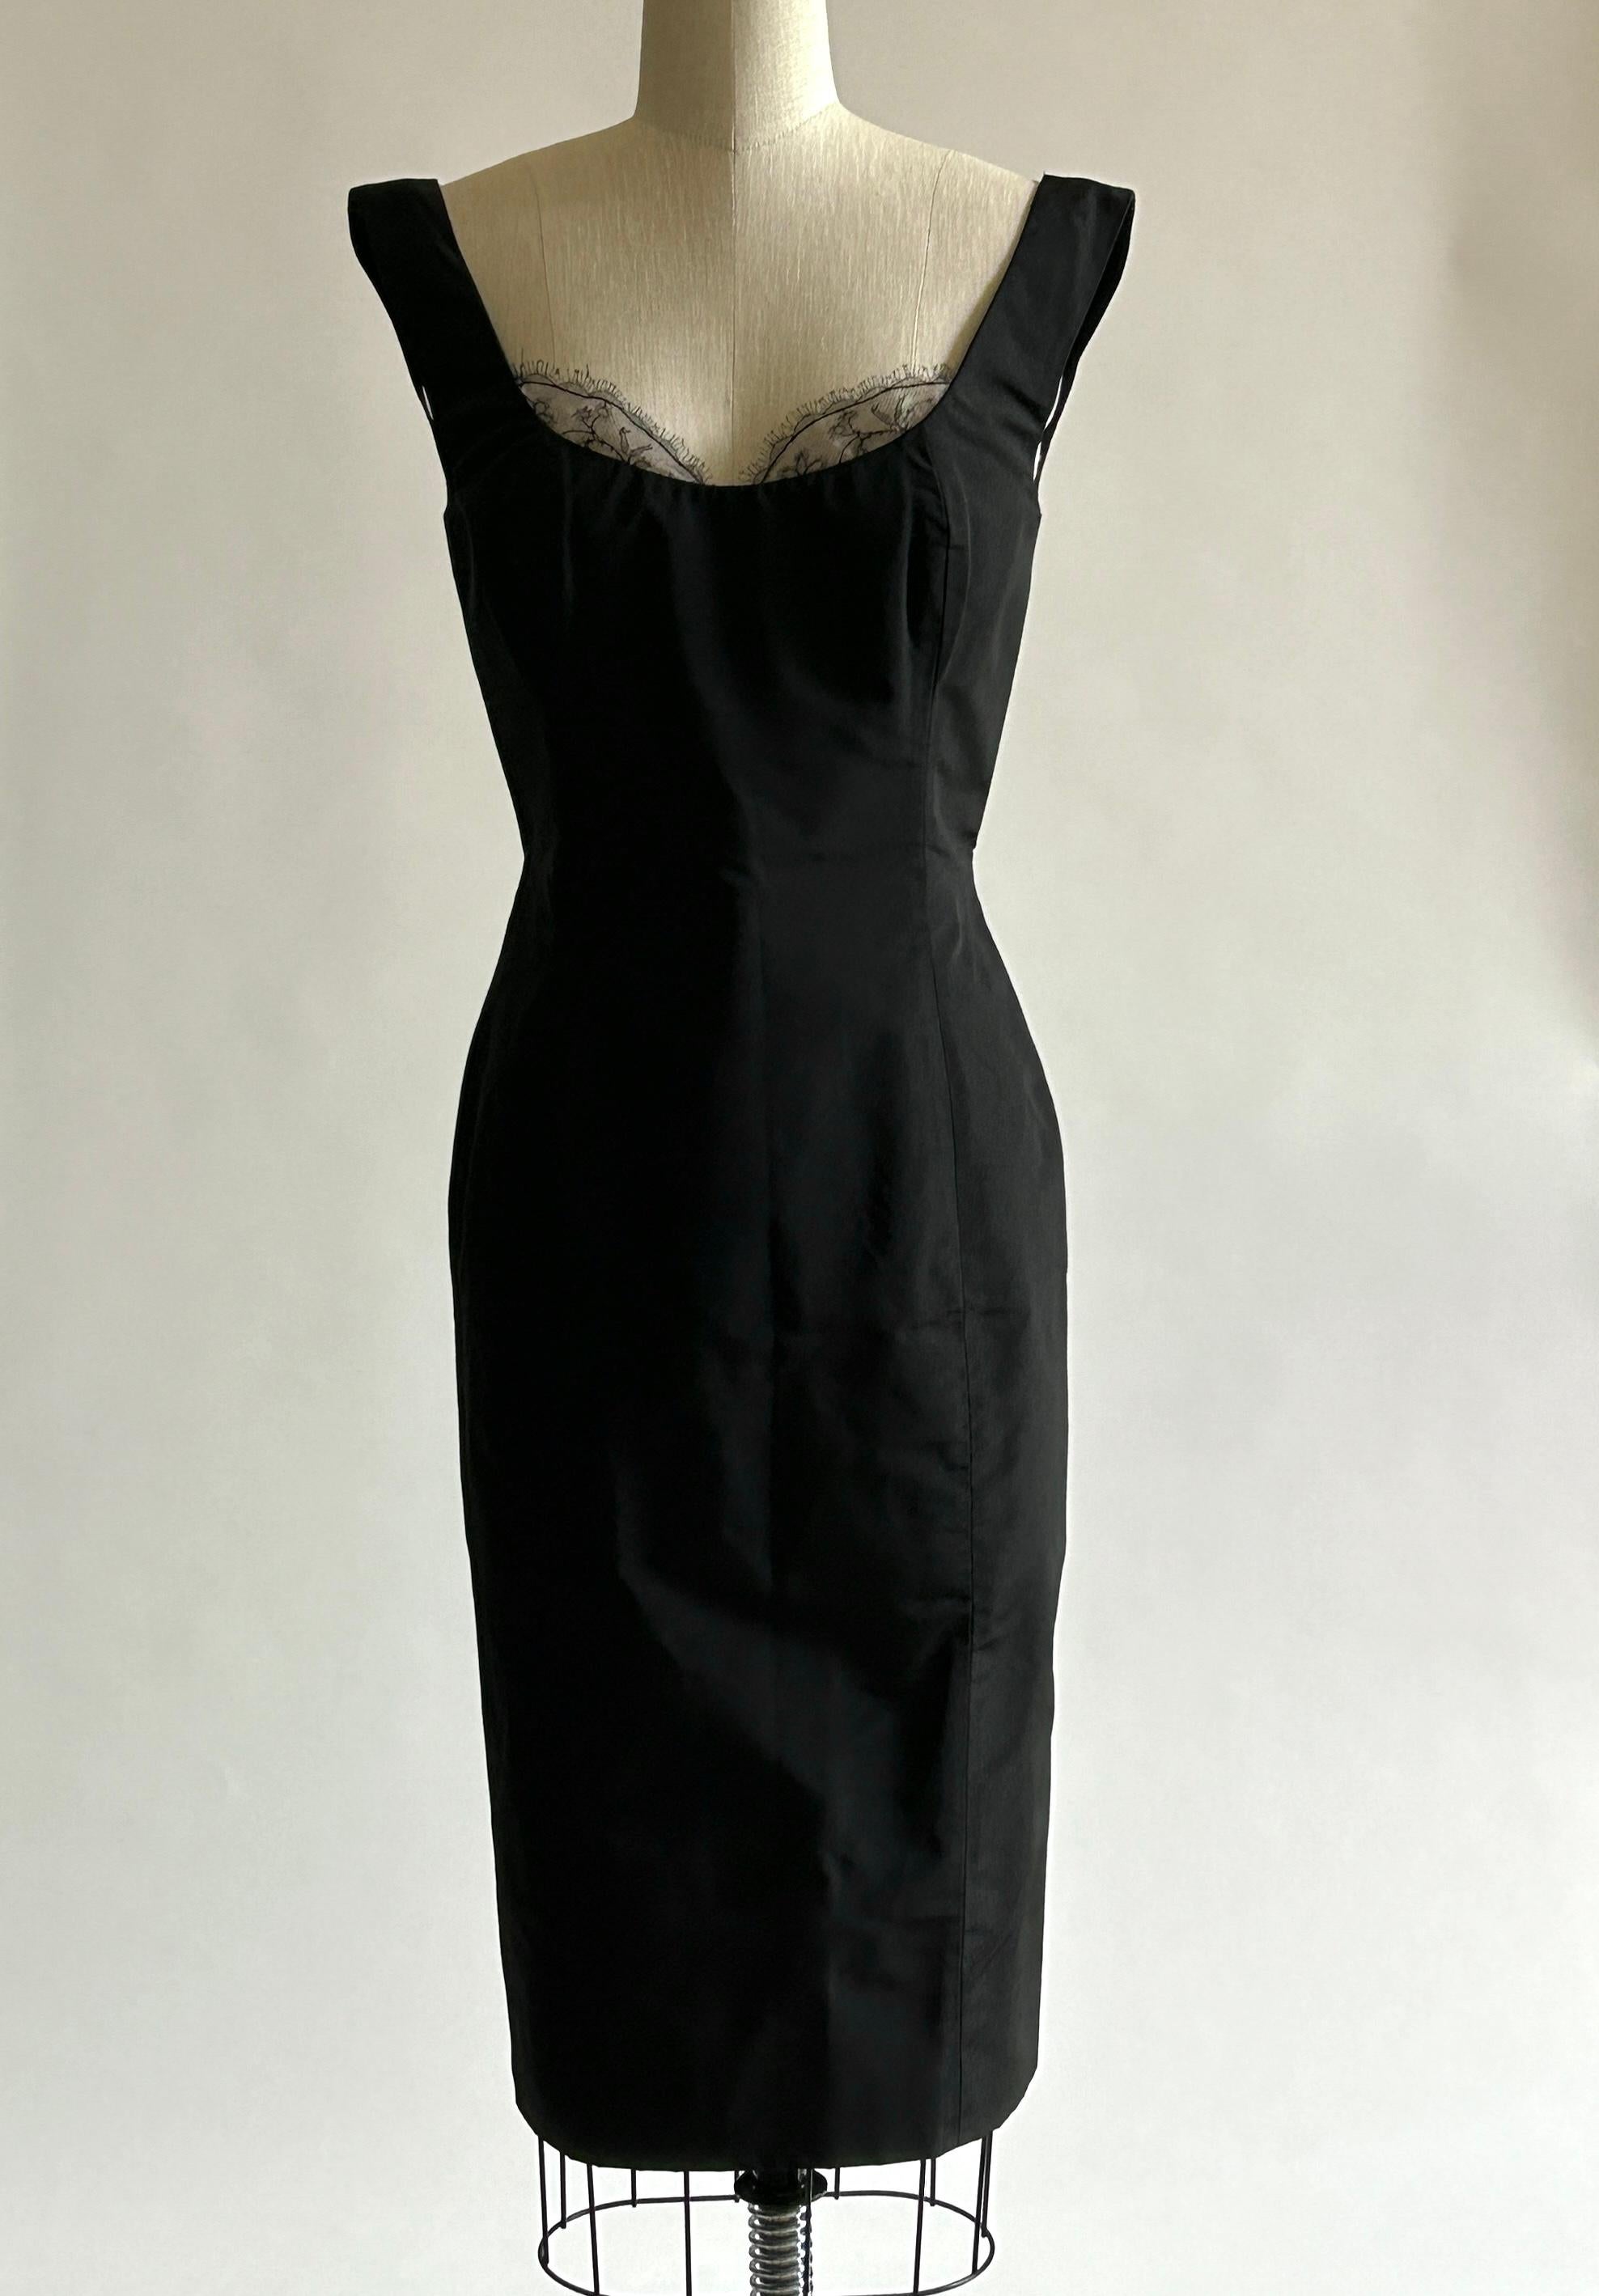 Alexander McQueen black silk dress from the 2005 Hitchcock inspired collection 'The Man Who Knew Too Much,' which channeled Tippi Hedren and Marilyn Monroe. Fitted midi length silhouette with lace accent at bust. Boned at upper bodice. Back zip and